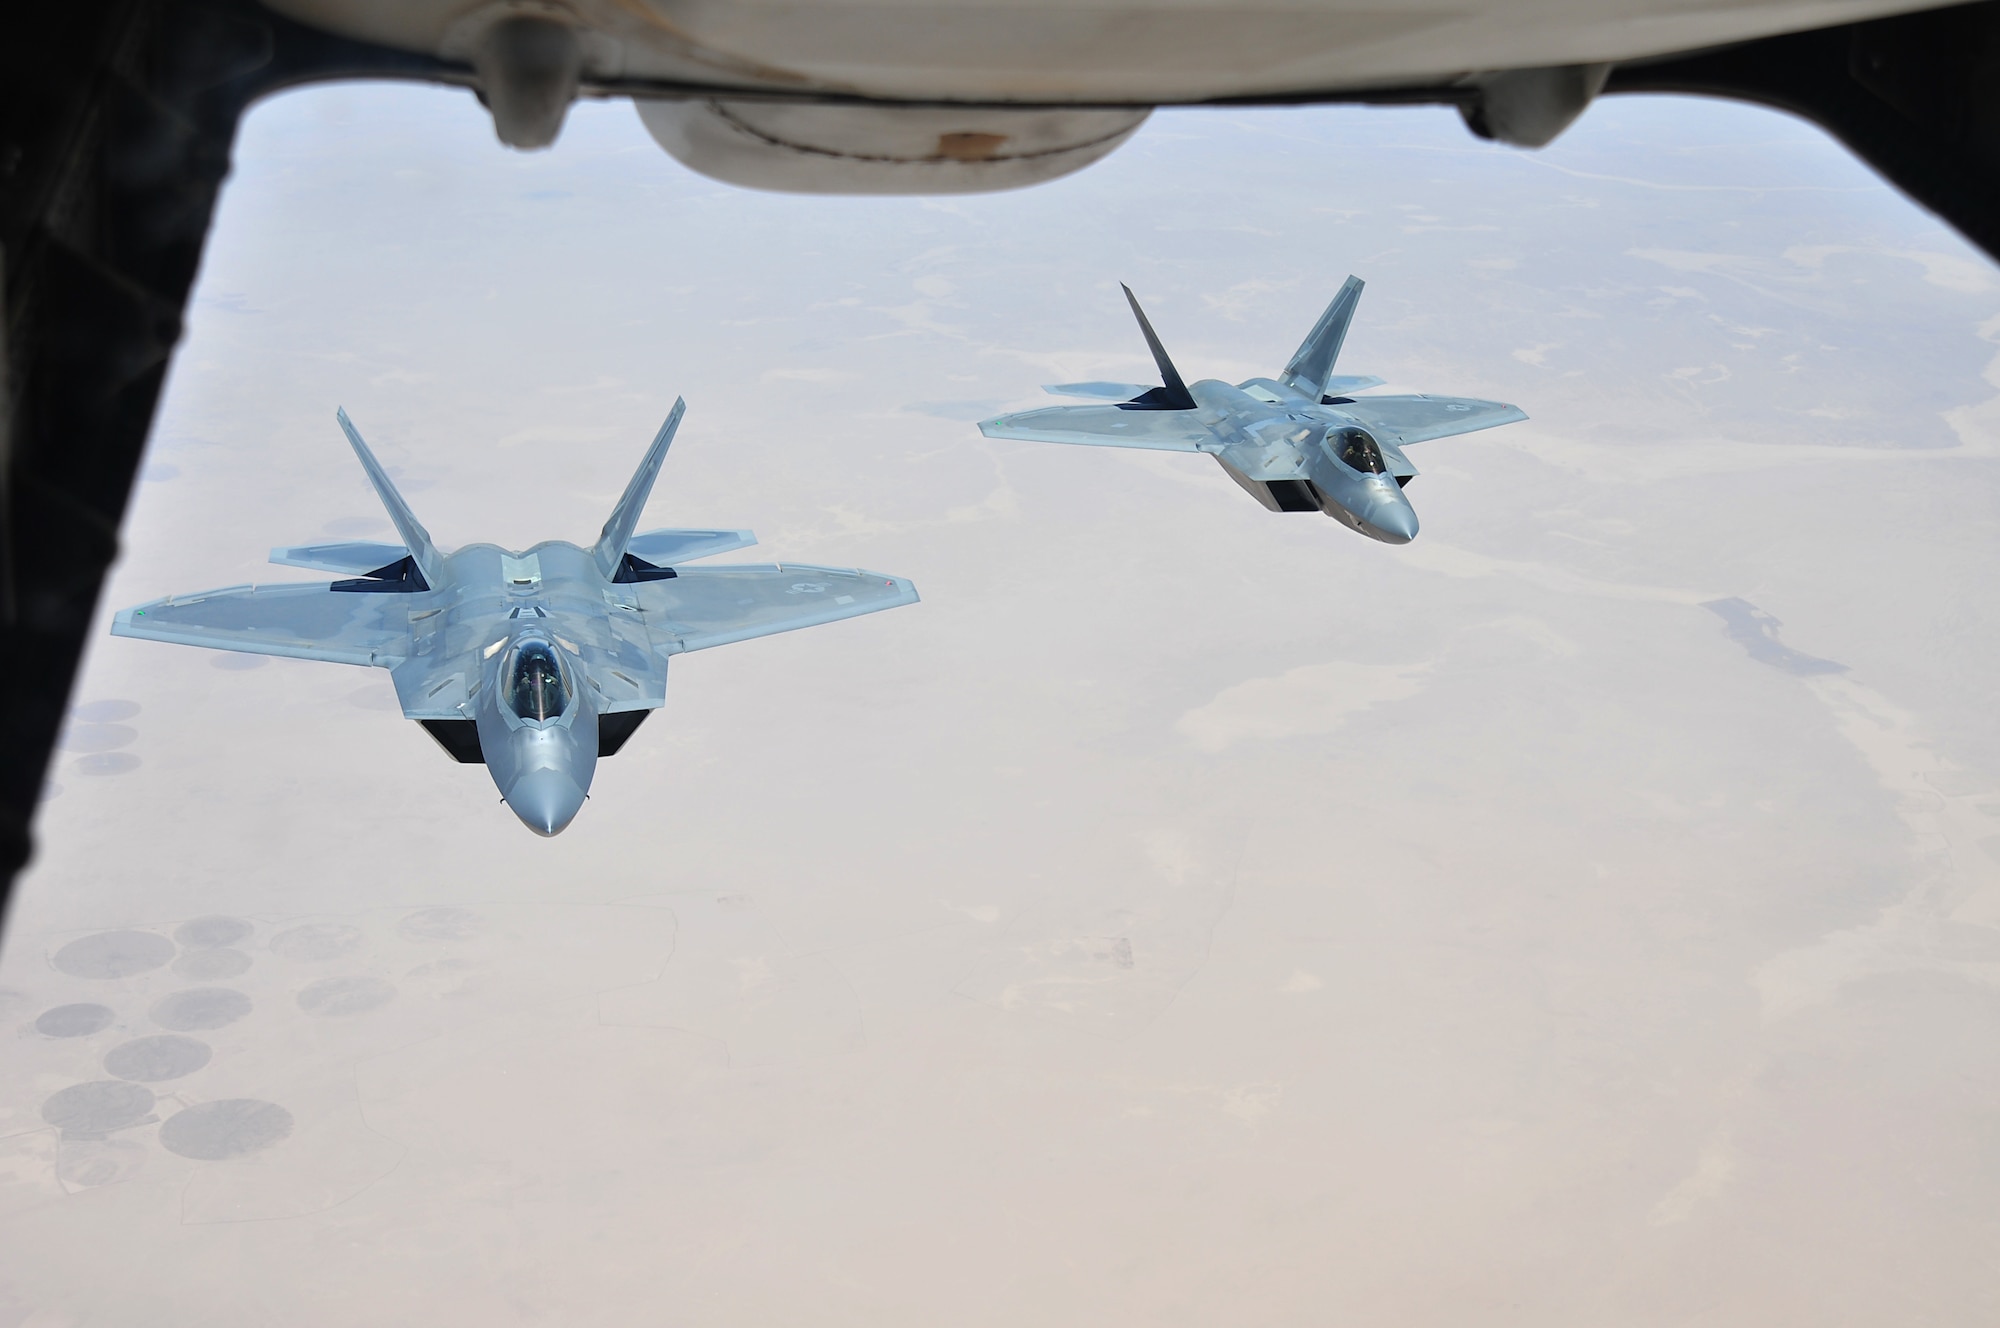 Two F-22 Raptors assigned to the 94th Fighter Squadron at the 380th Air Expeditionary Wing, Al Dhafra Air Base, support Operation Inherent Resolve over the skies of Southwest Asia, May 16, 2018. The Raptor’s mission is to help ensure that the operations of U.S. and coalition forces on the ground and in the air are unimpeded by adversary aircraft.